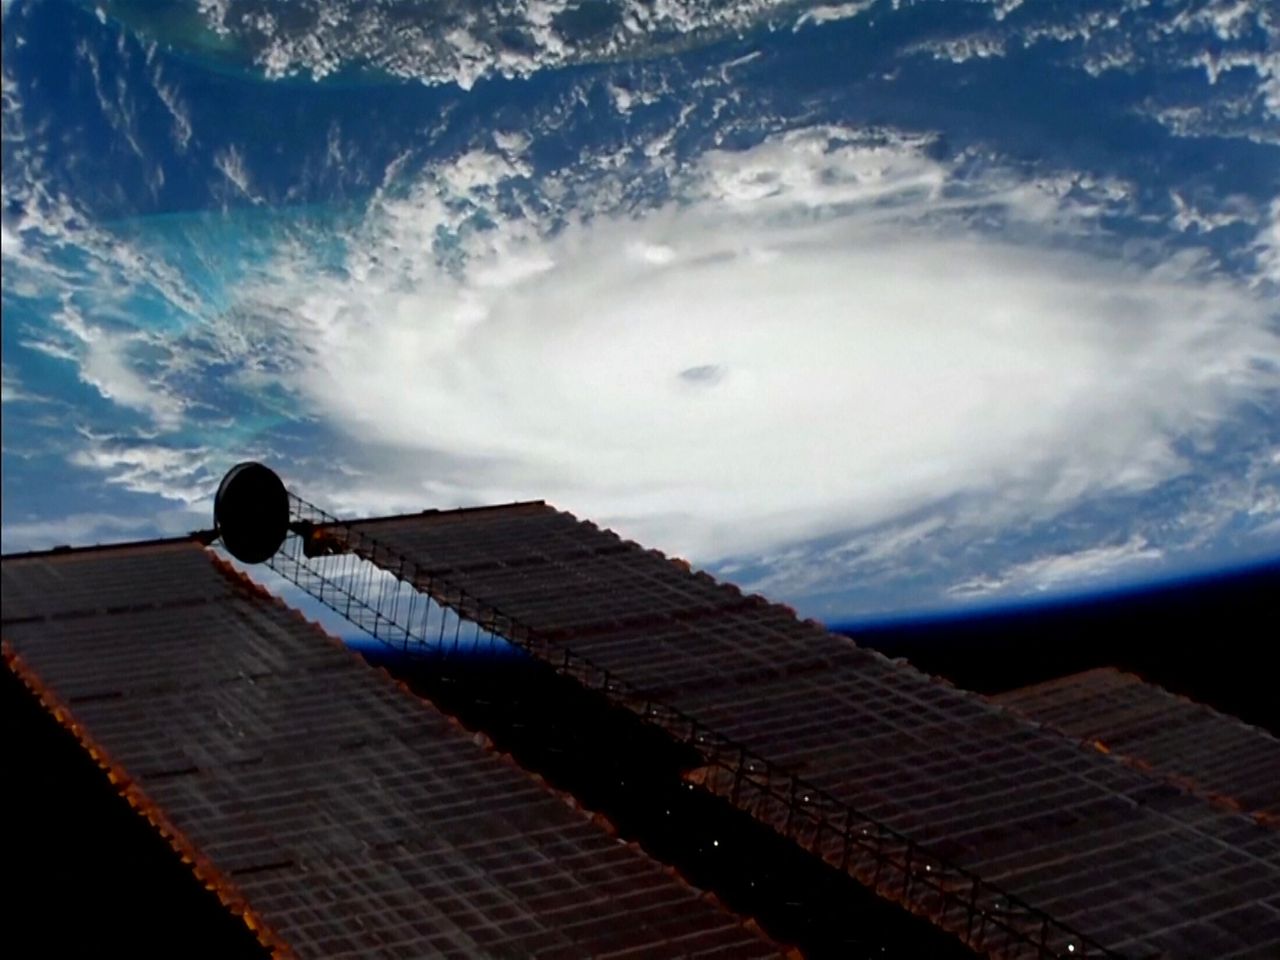 Hurricane Dorian viewed from the International Space Station September 1